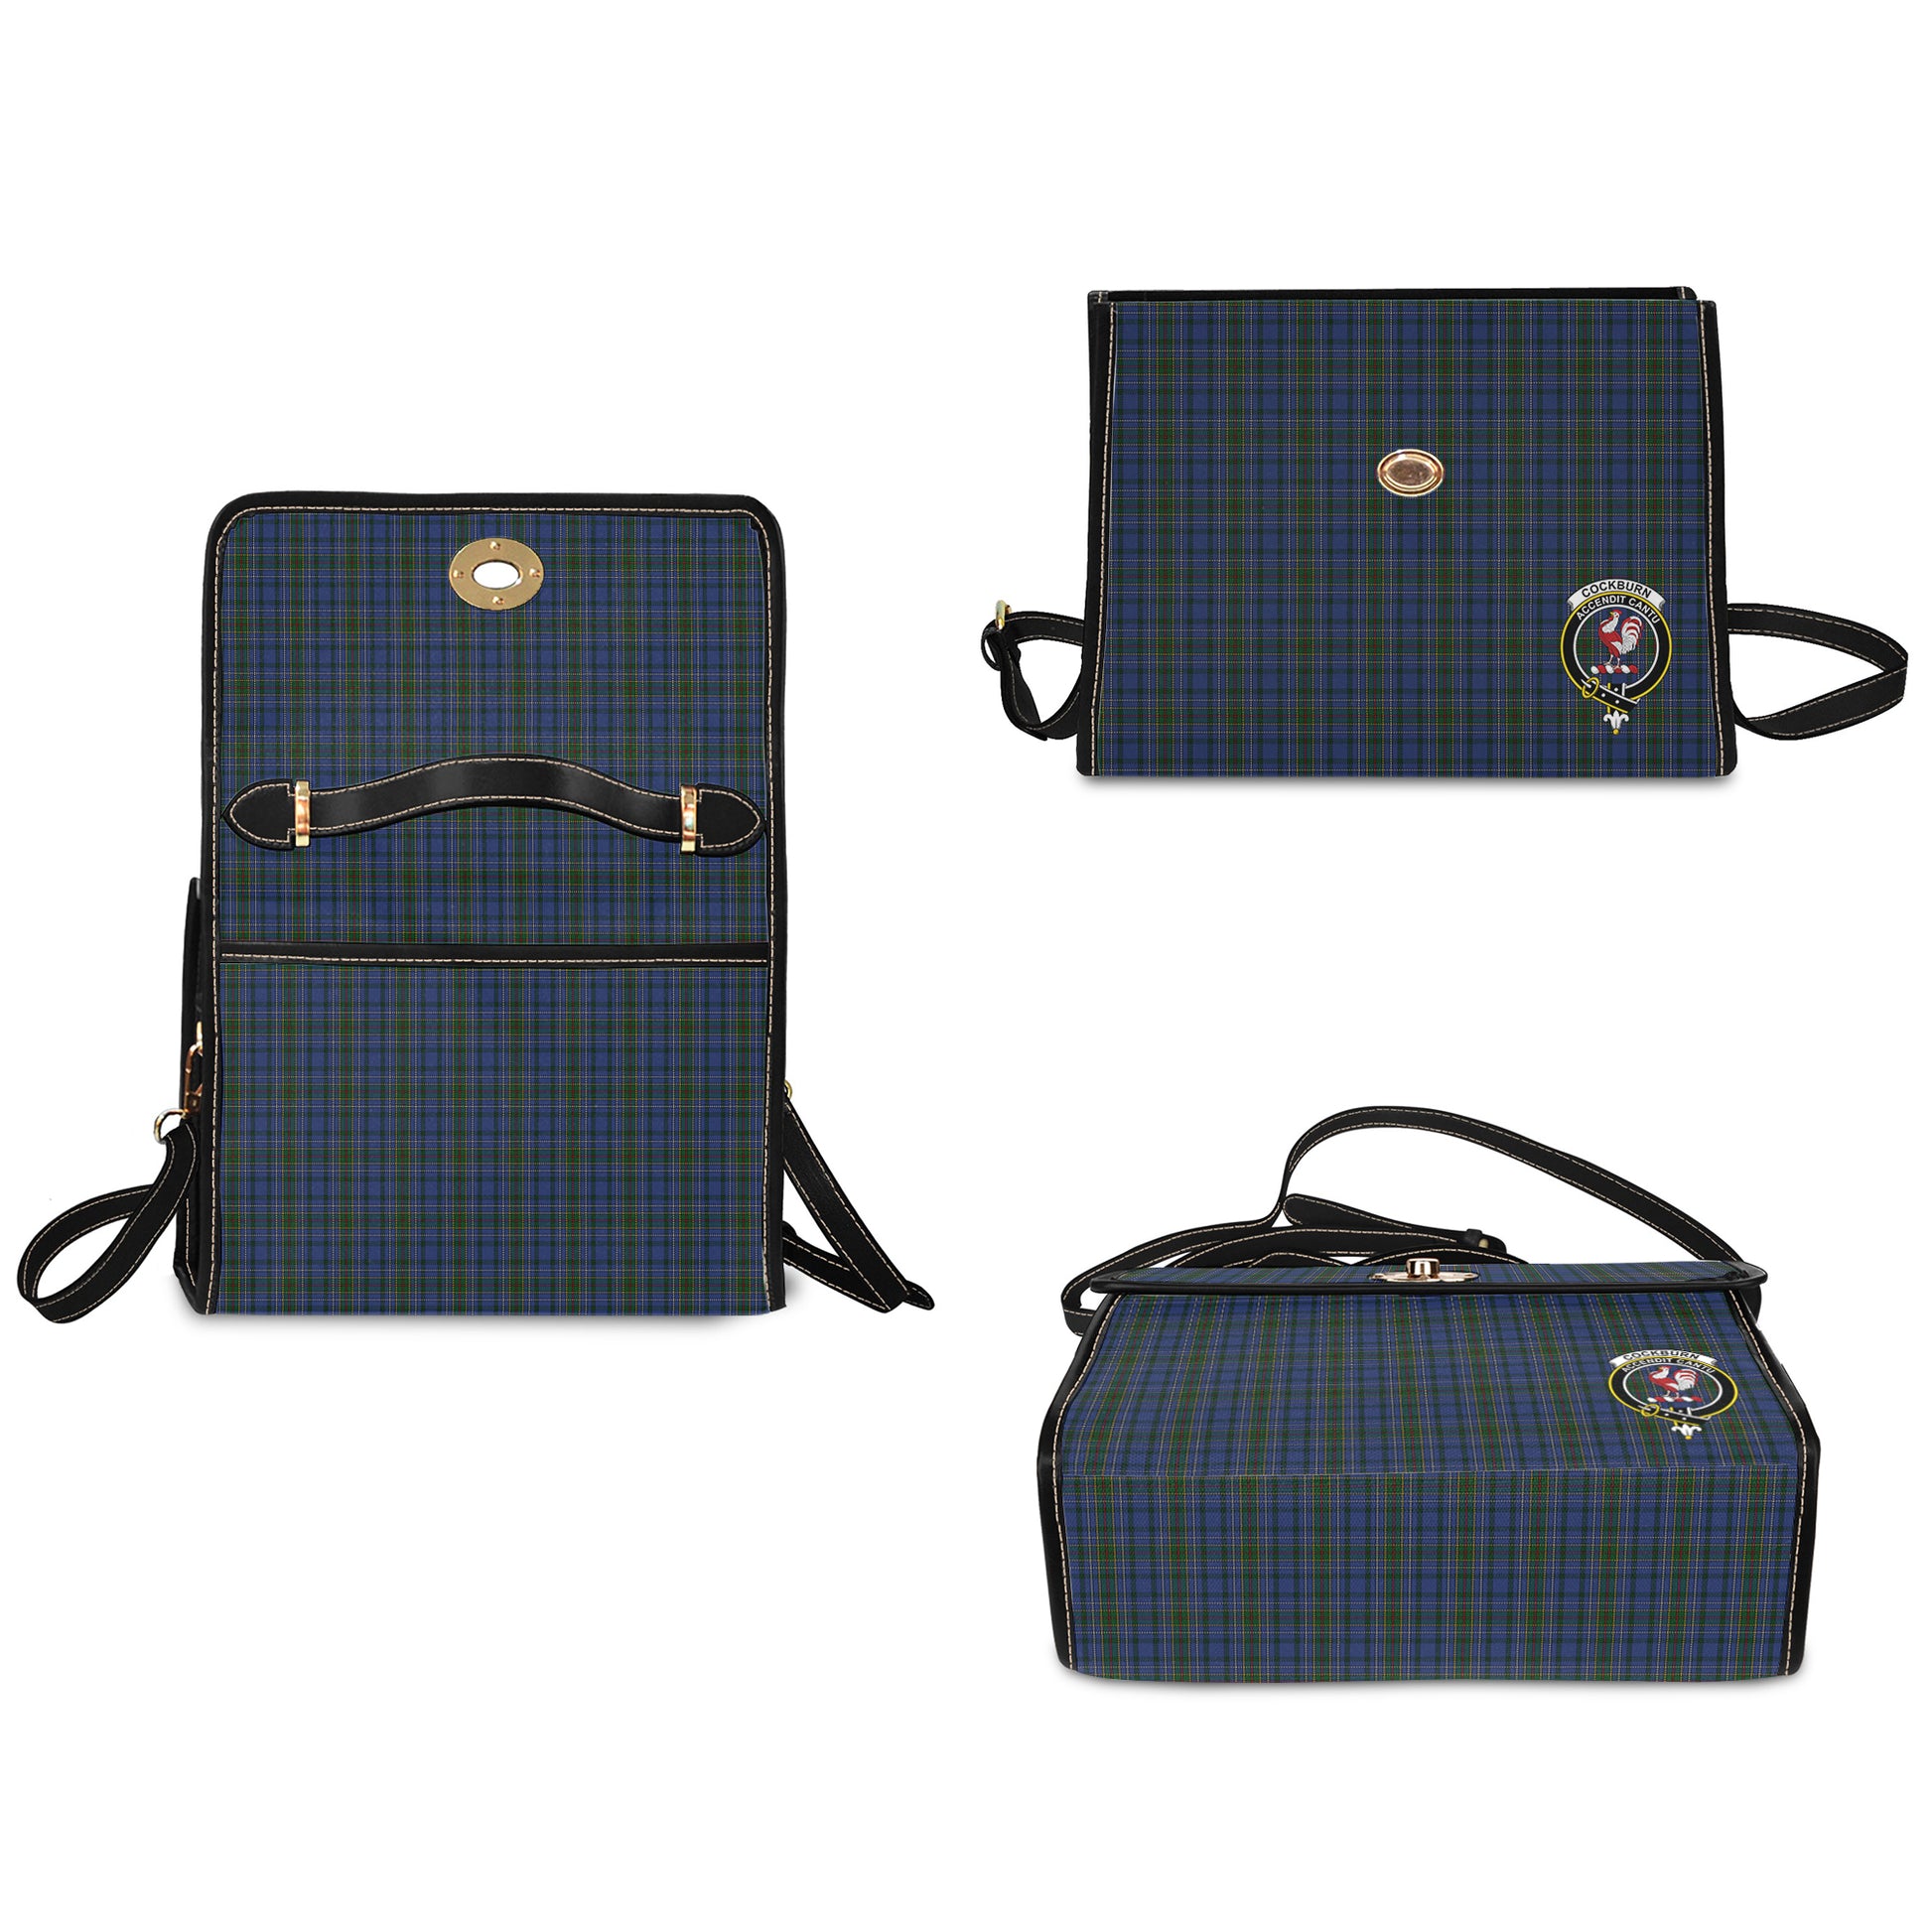 cockburn-blue-tartan-leather-strap-waterproof-canvas-bag-with-family-crest